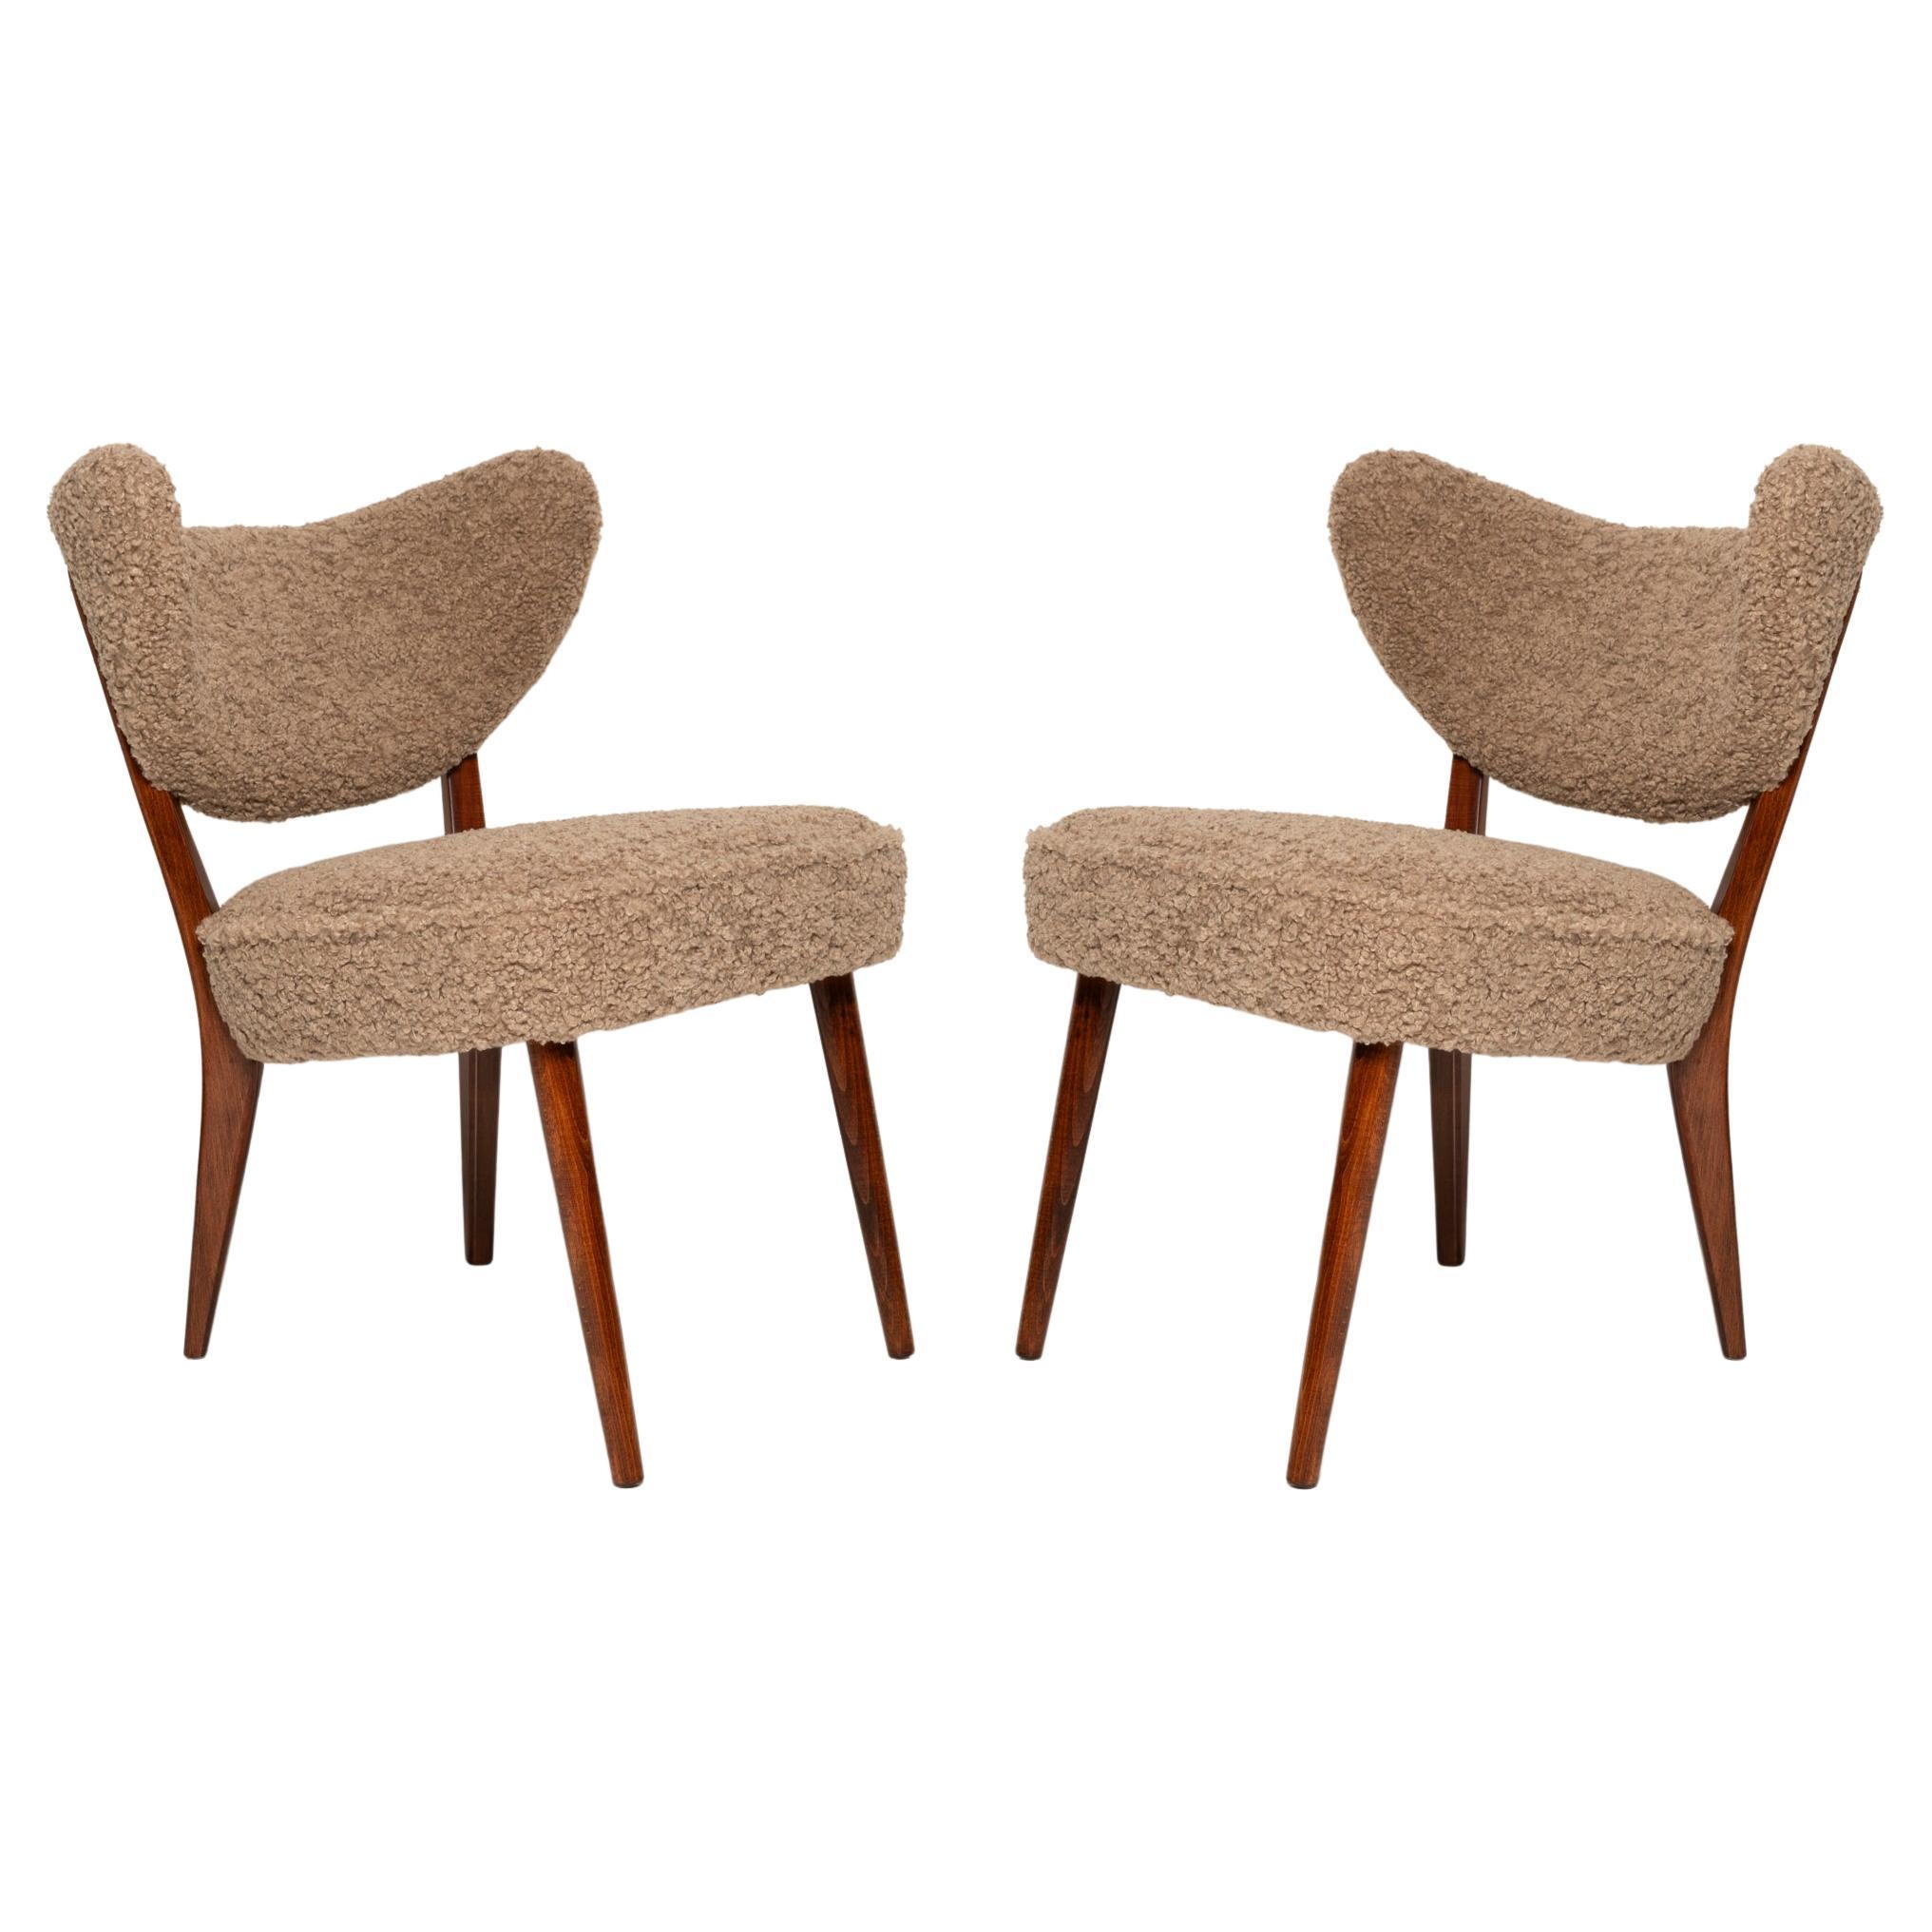 Pair of Beige Boucle Shell Club Chairs, by Vintola Studio, Europe, Poland